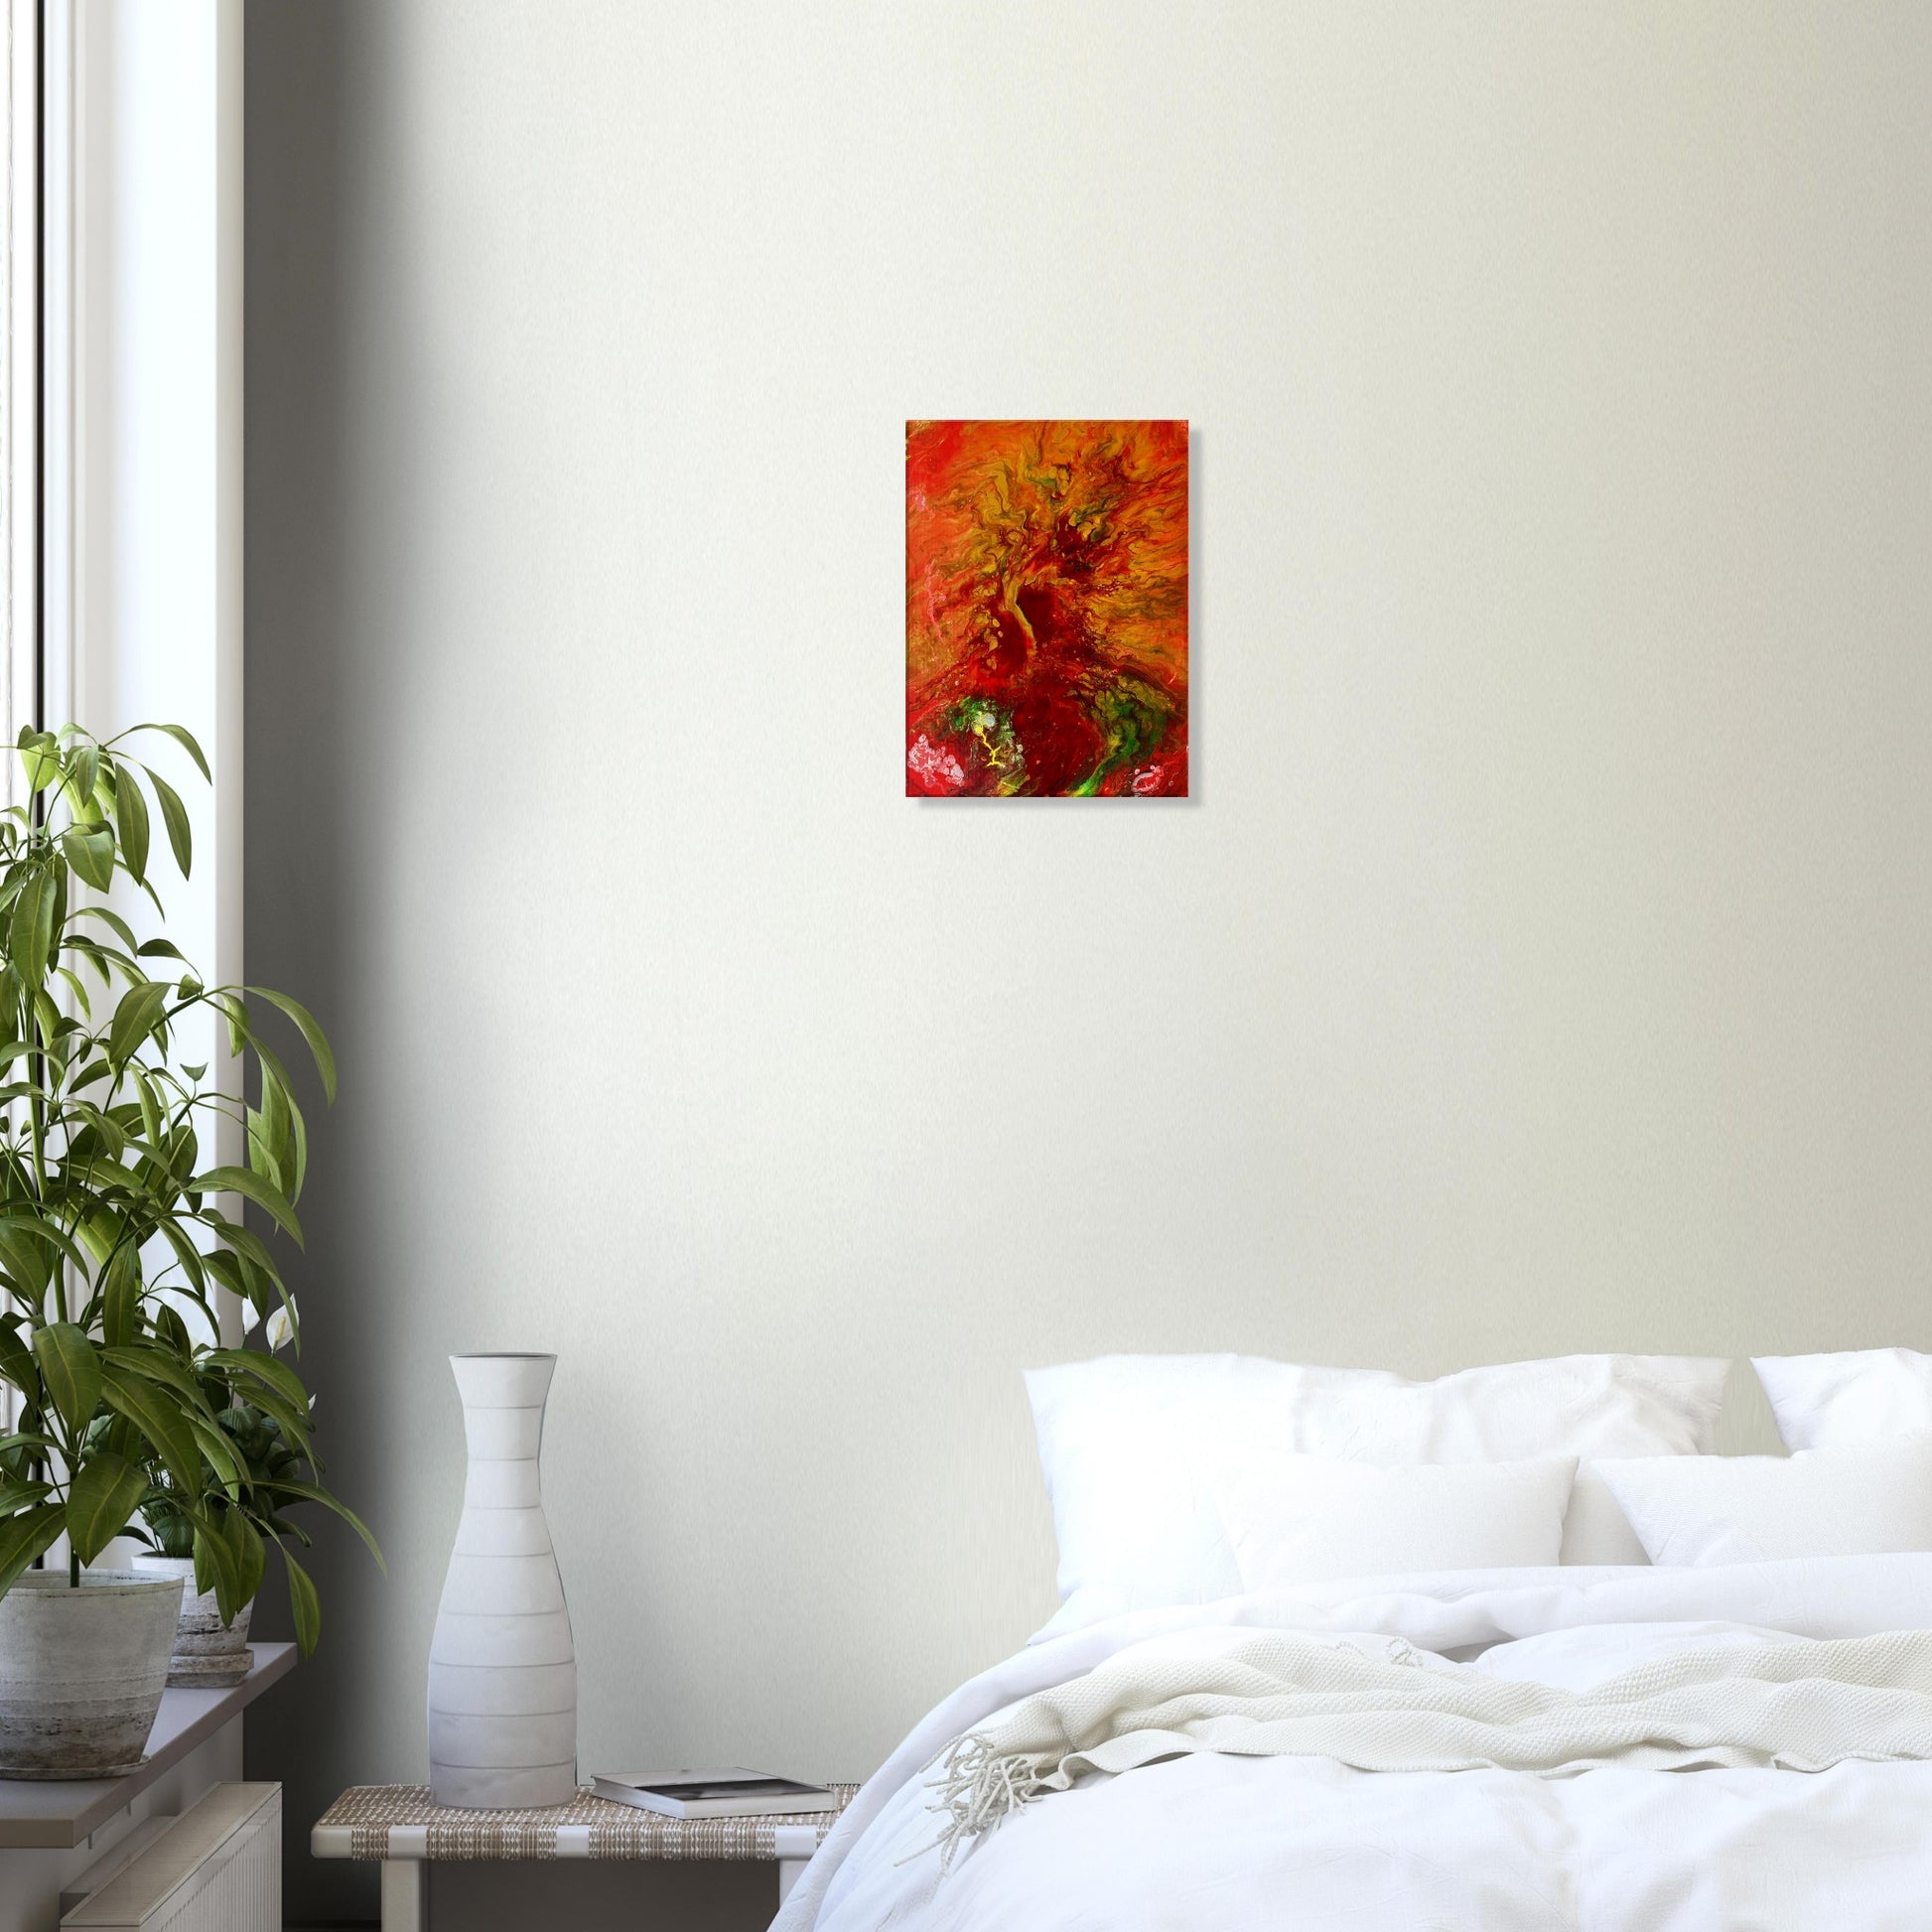 The vibrant 'The Tree of Life' canvas print by Yana Virtuoso, mounted on a wall, infusing energy and color into the room's decor.